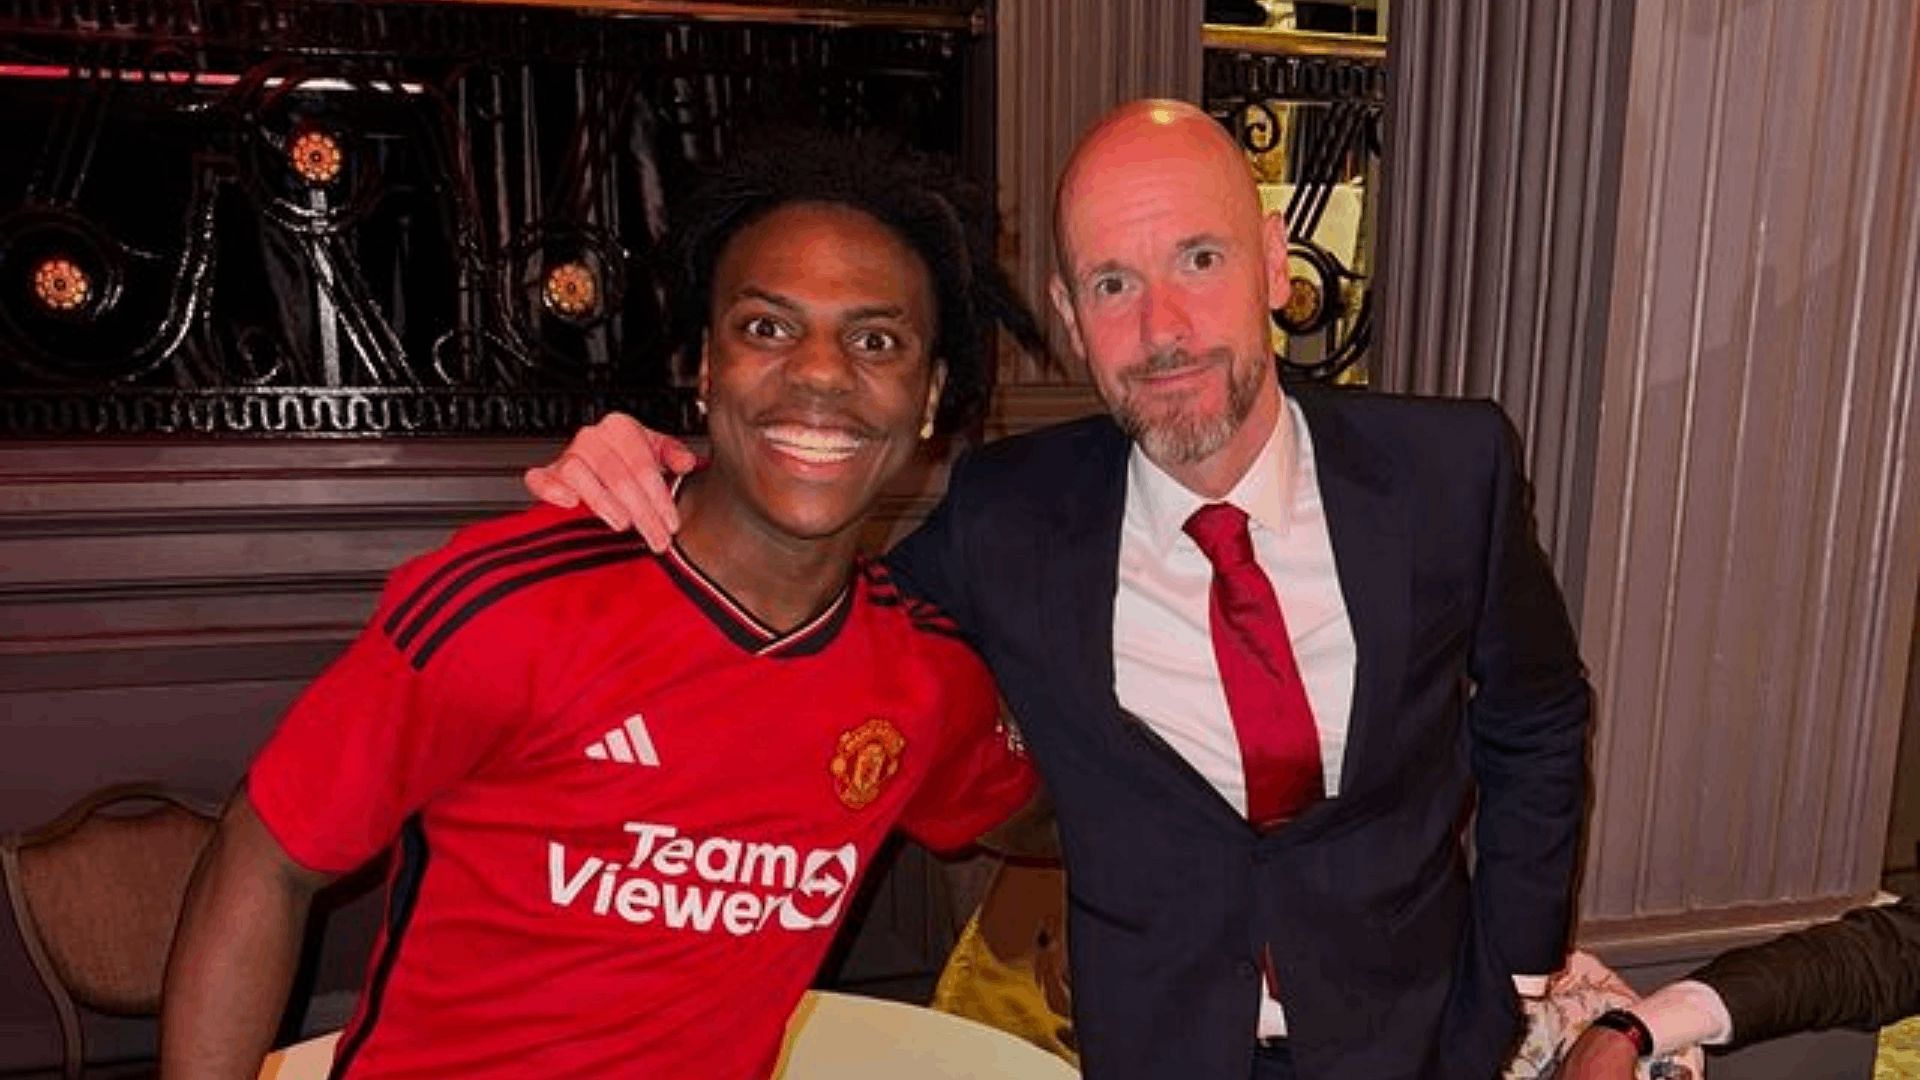 Darren was invited the Man United after-party (Image via ishowspeed/Instagram)